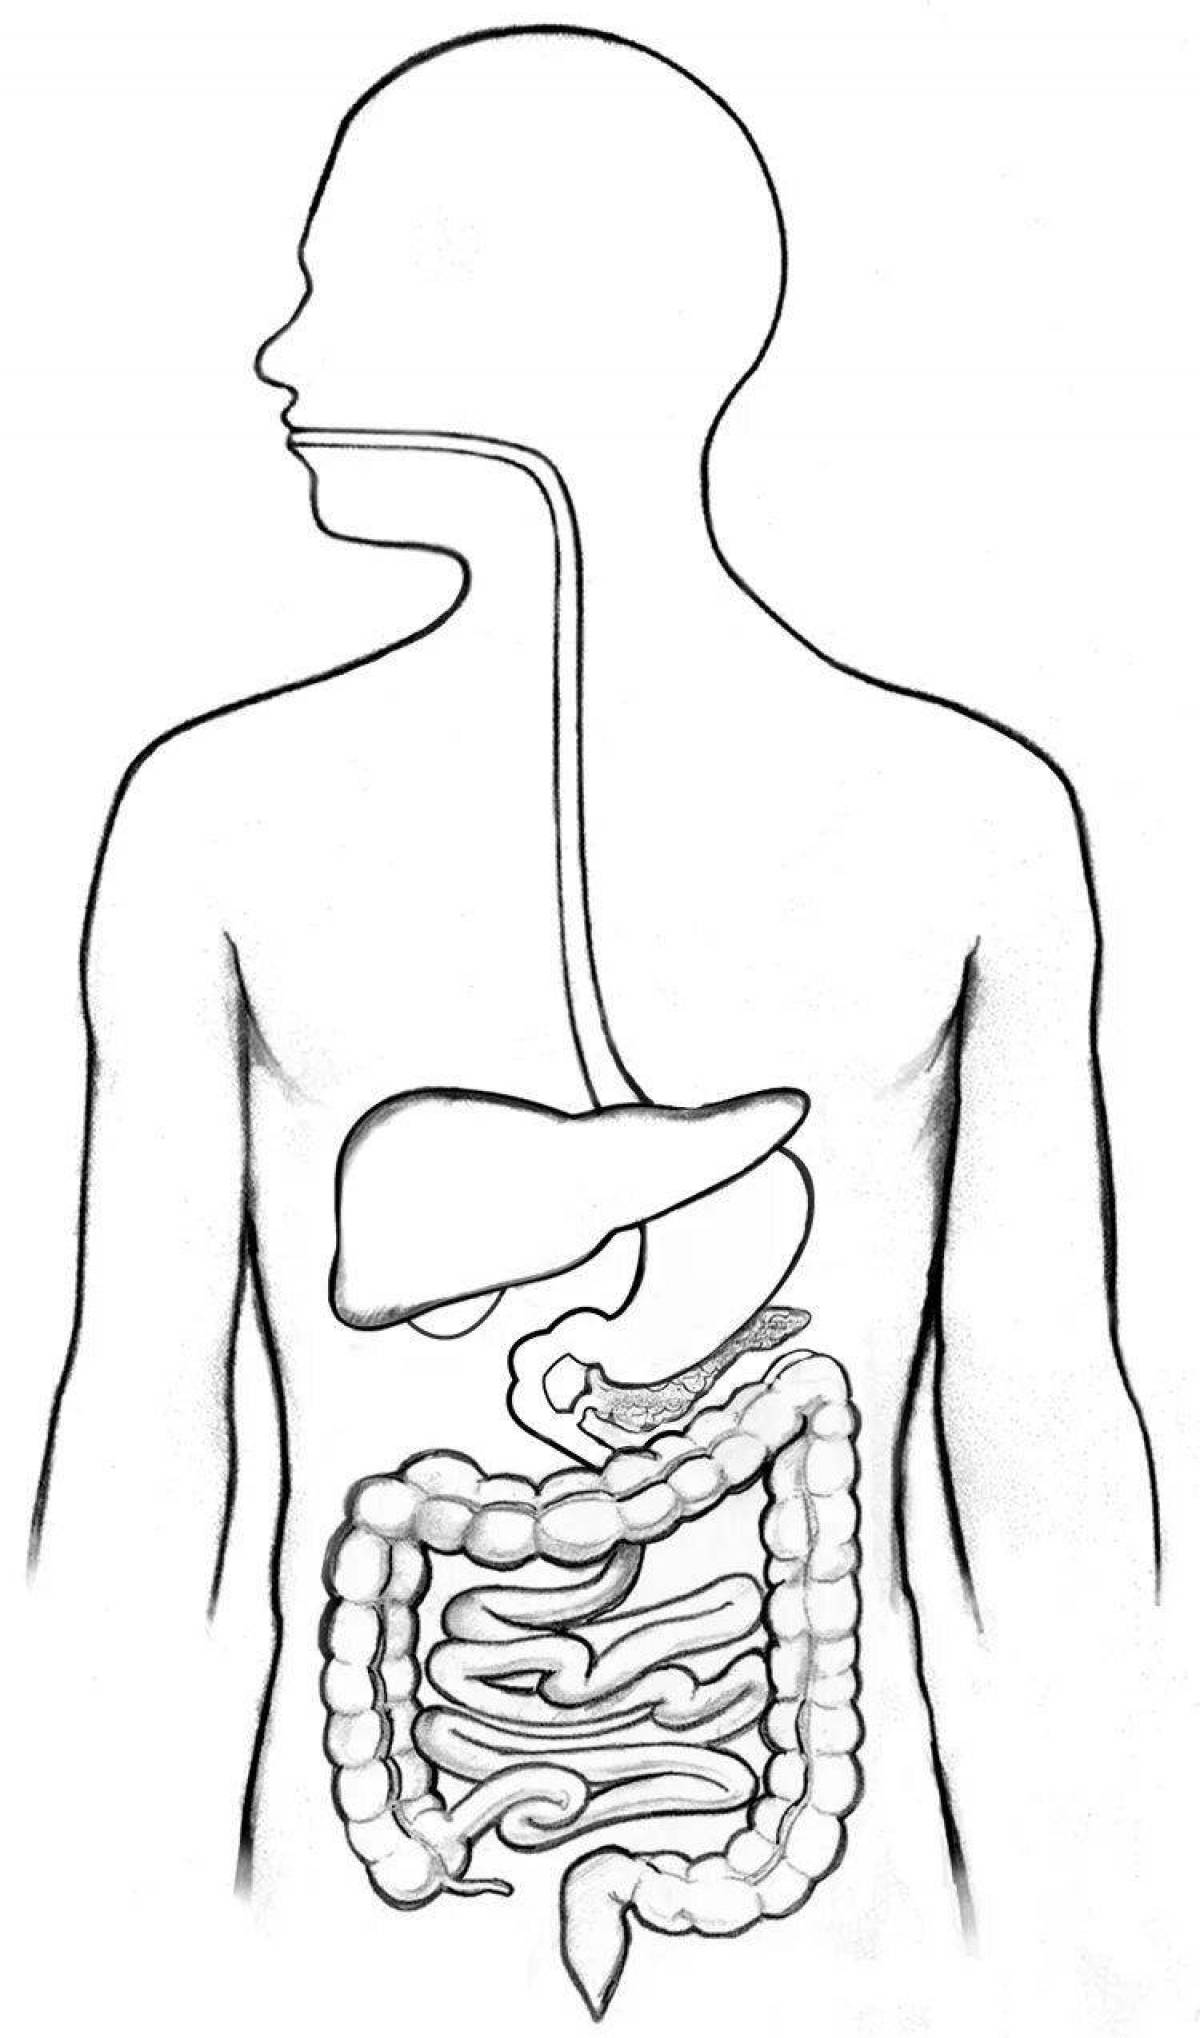 Fun coloring of the digestive system